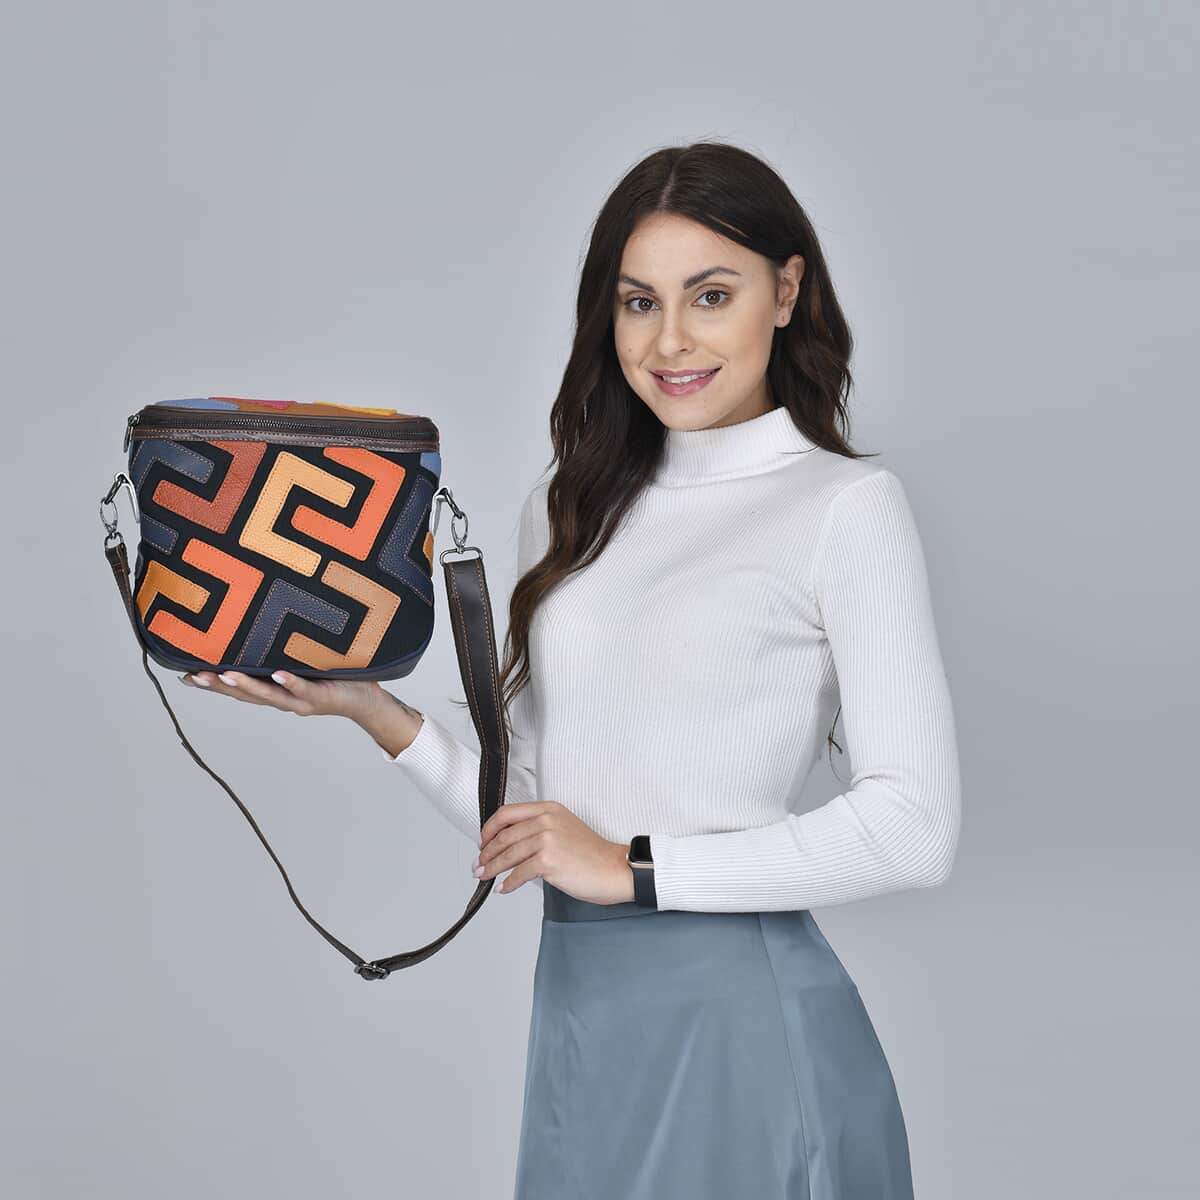 CHAOS BY ELSIE Multi Color Fret Pattern Genuine Leather Crossbody Bag with Shoulder Strap (9.84"x3.15"x8.27") image number 2